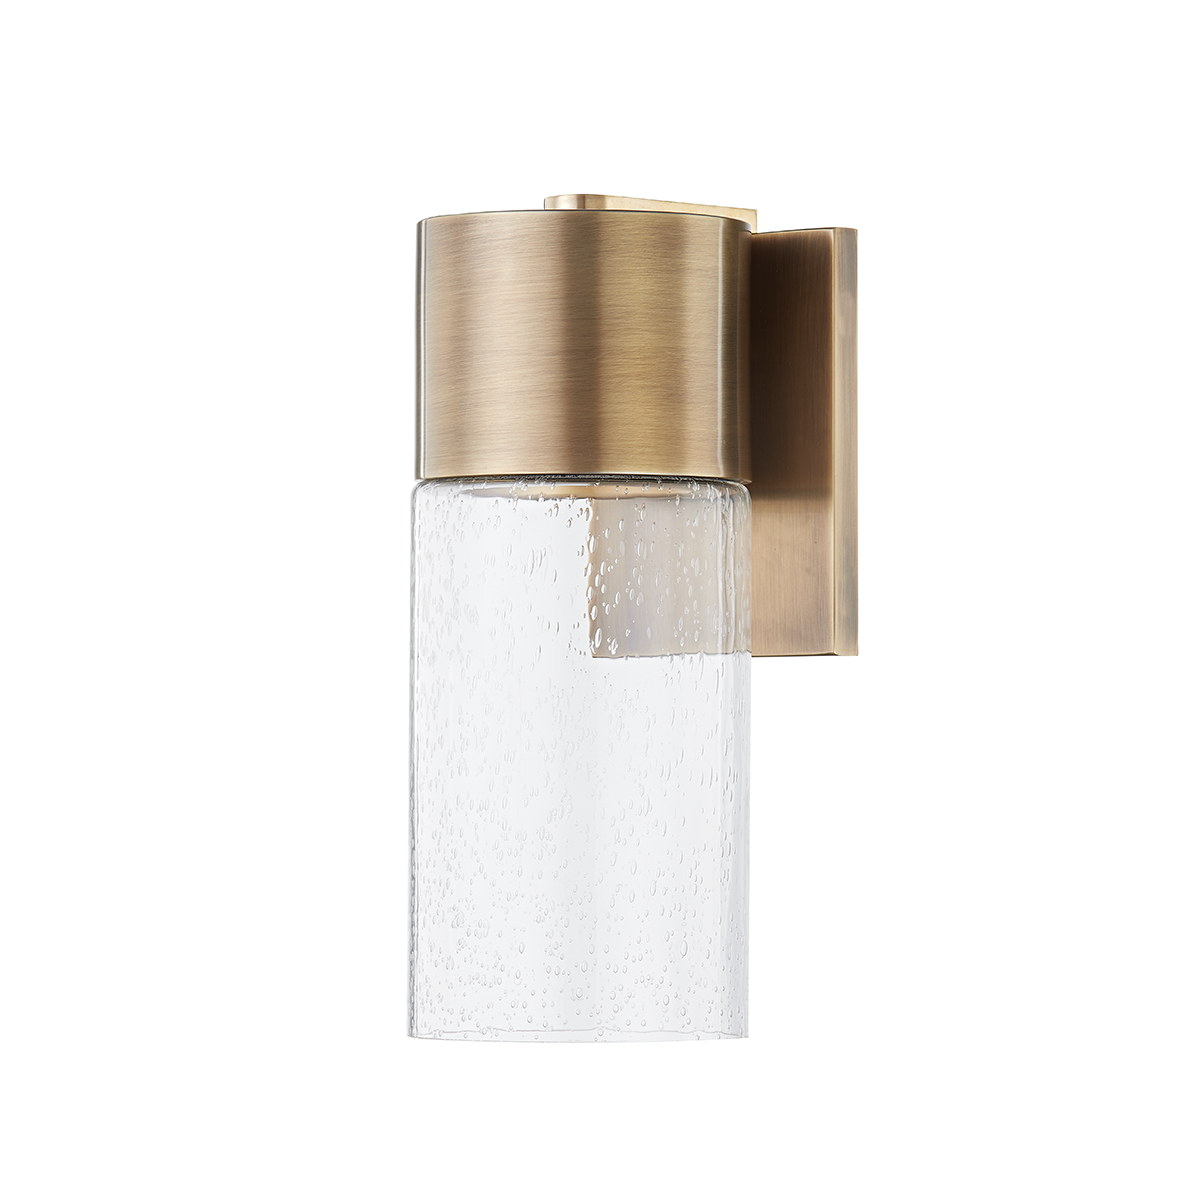 Troy PRISTINE 1 LIGHT SMALL EXTERIOR WALL SCONCE B5115 Outdoor l Wall Troy Lighting PATINA BRASS  